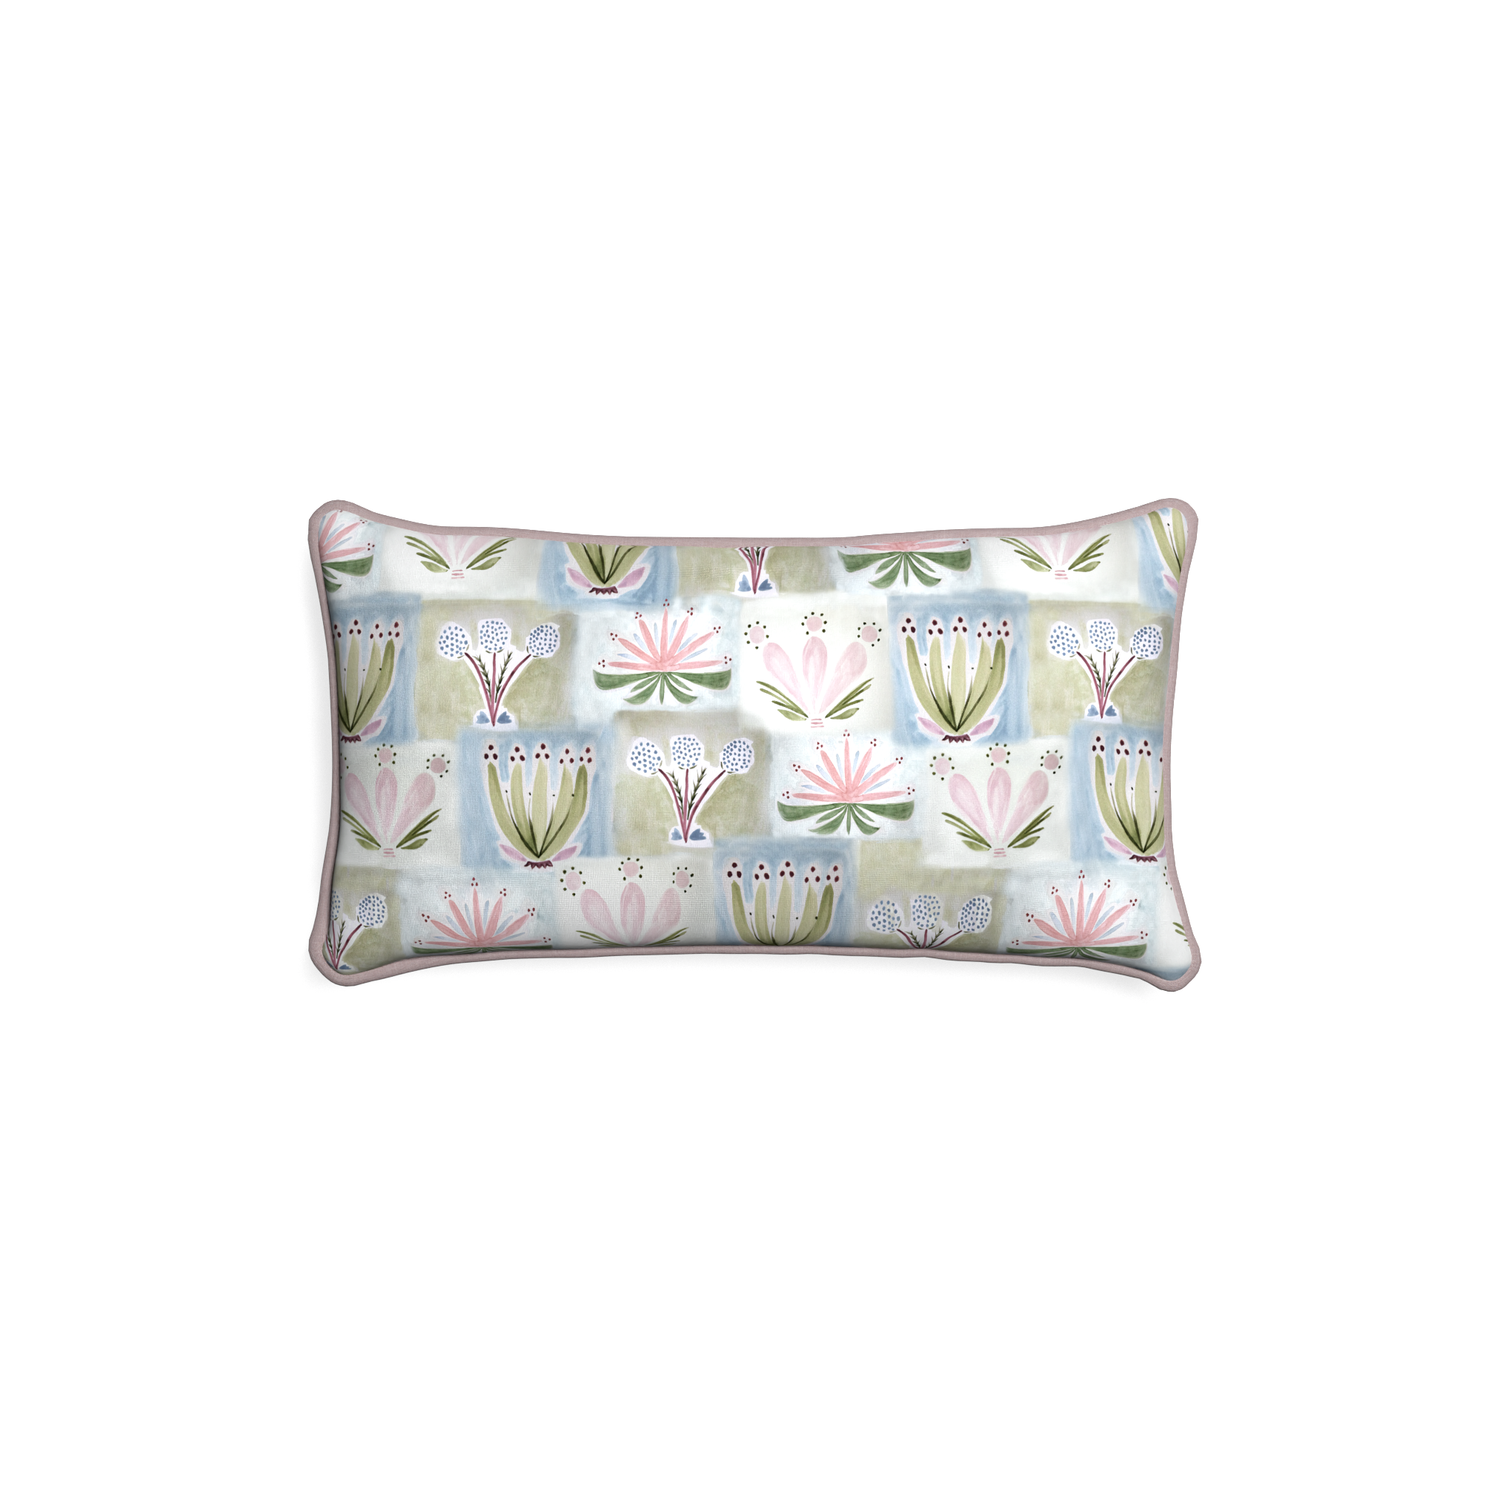 Petite-lumbar harper custom hand-painted floralpillow with orchid piping on white background